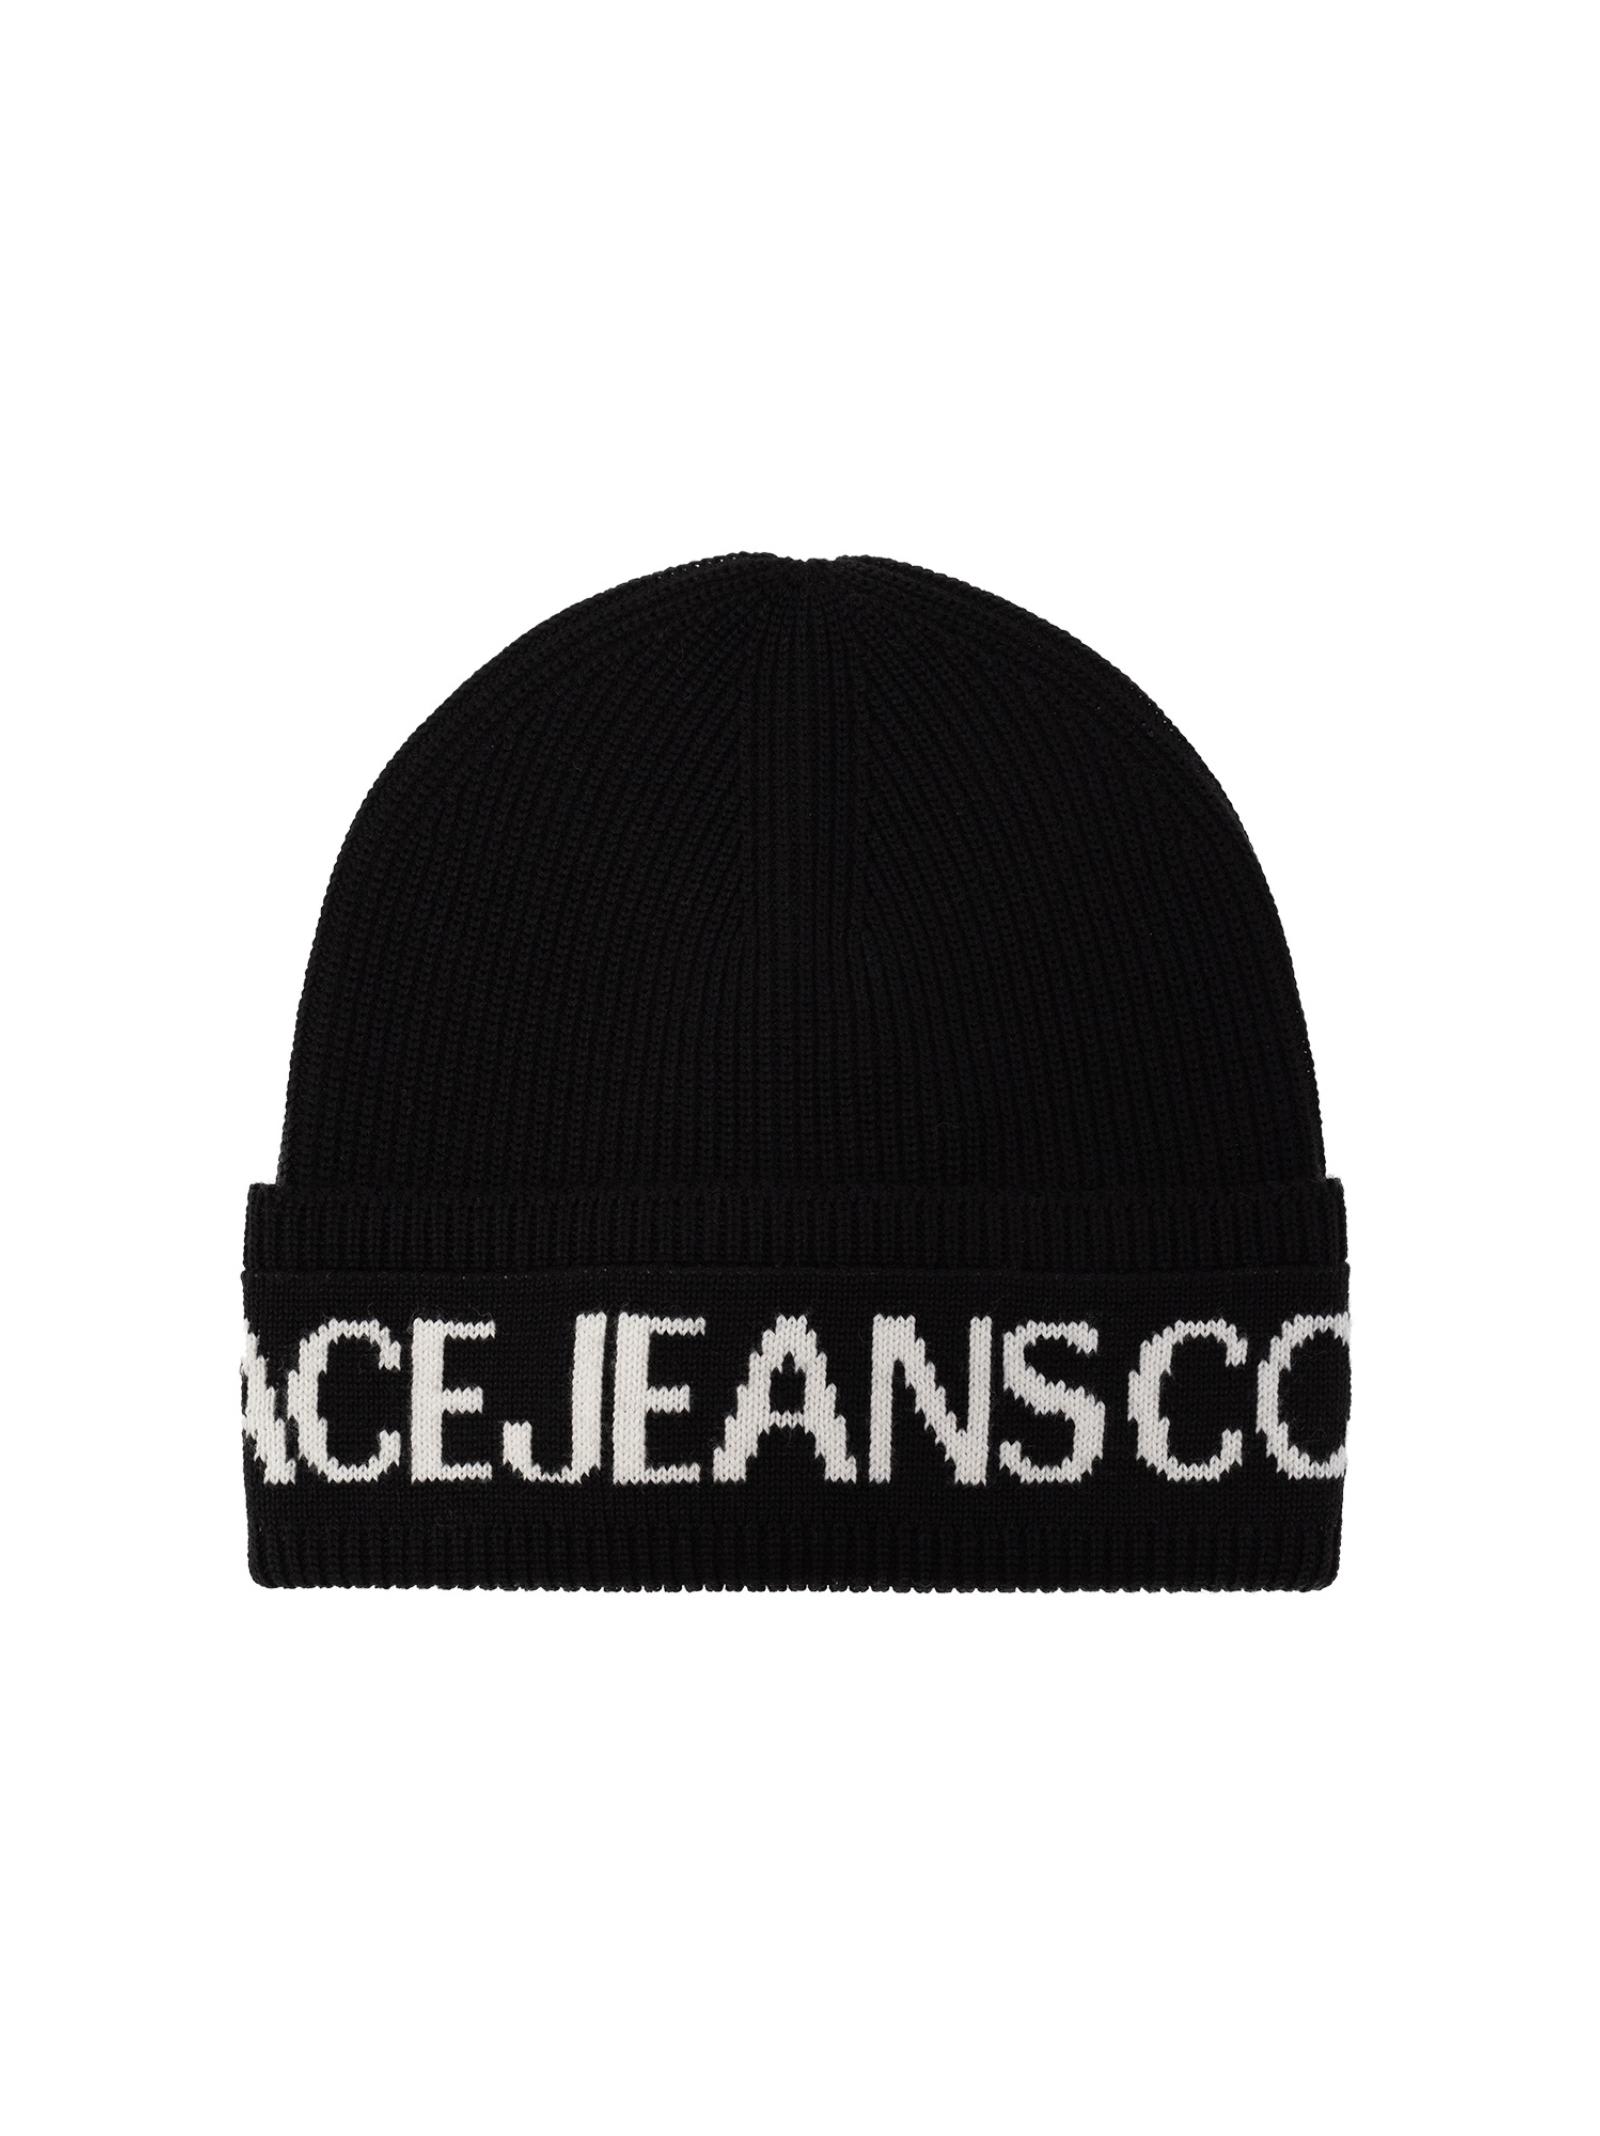 Versace Jeans Couture Hat In Black